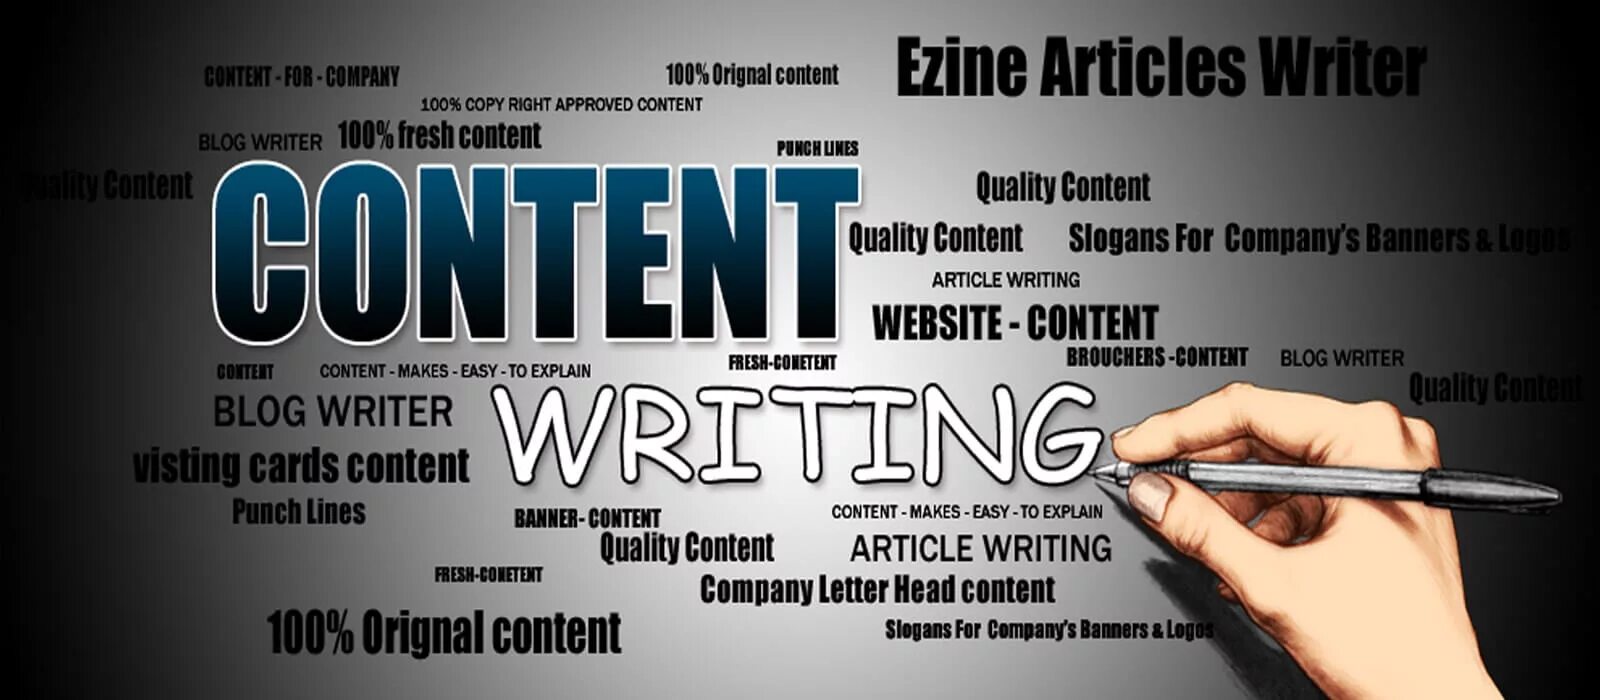 Article writing. Content writing. Write an article. Write content. Content 0 meta